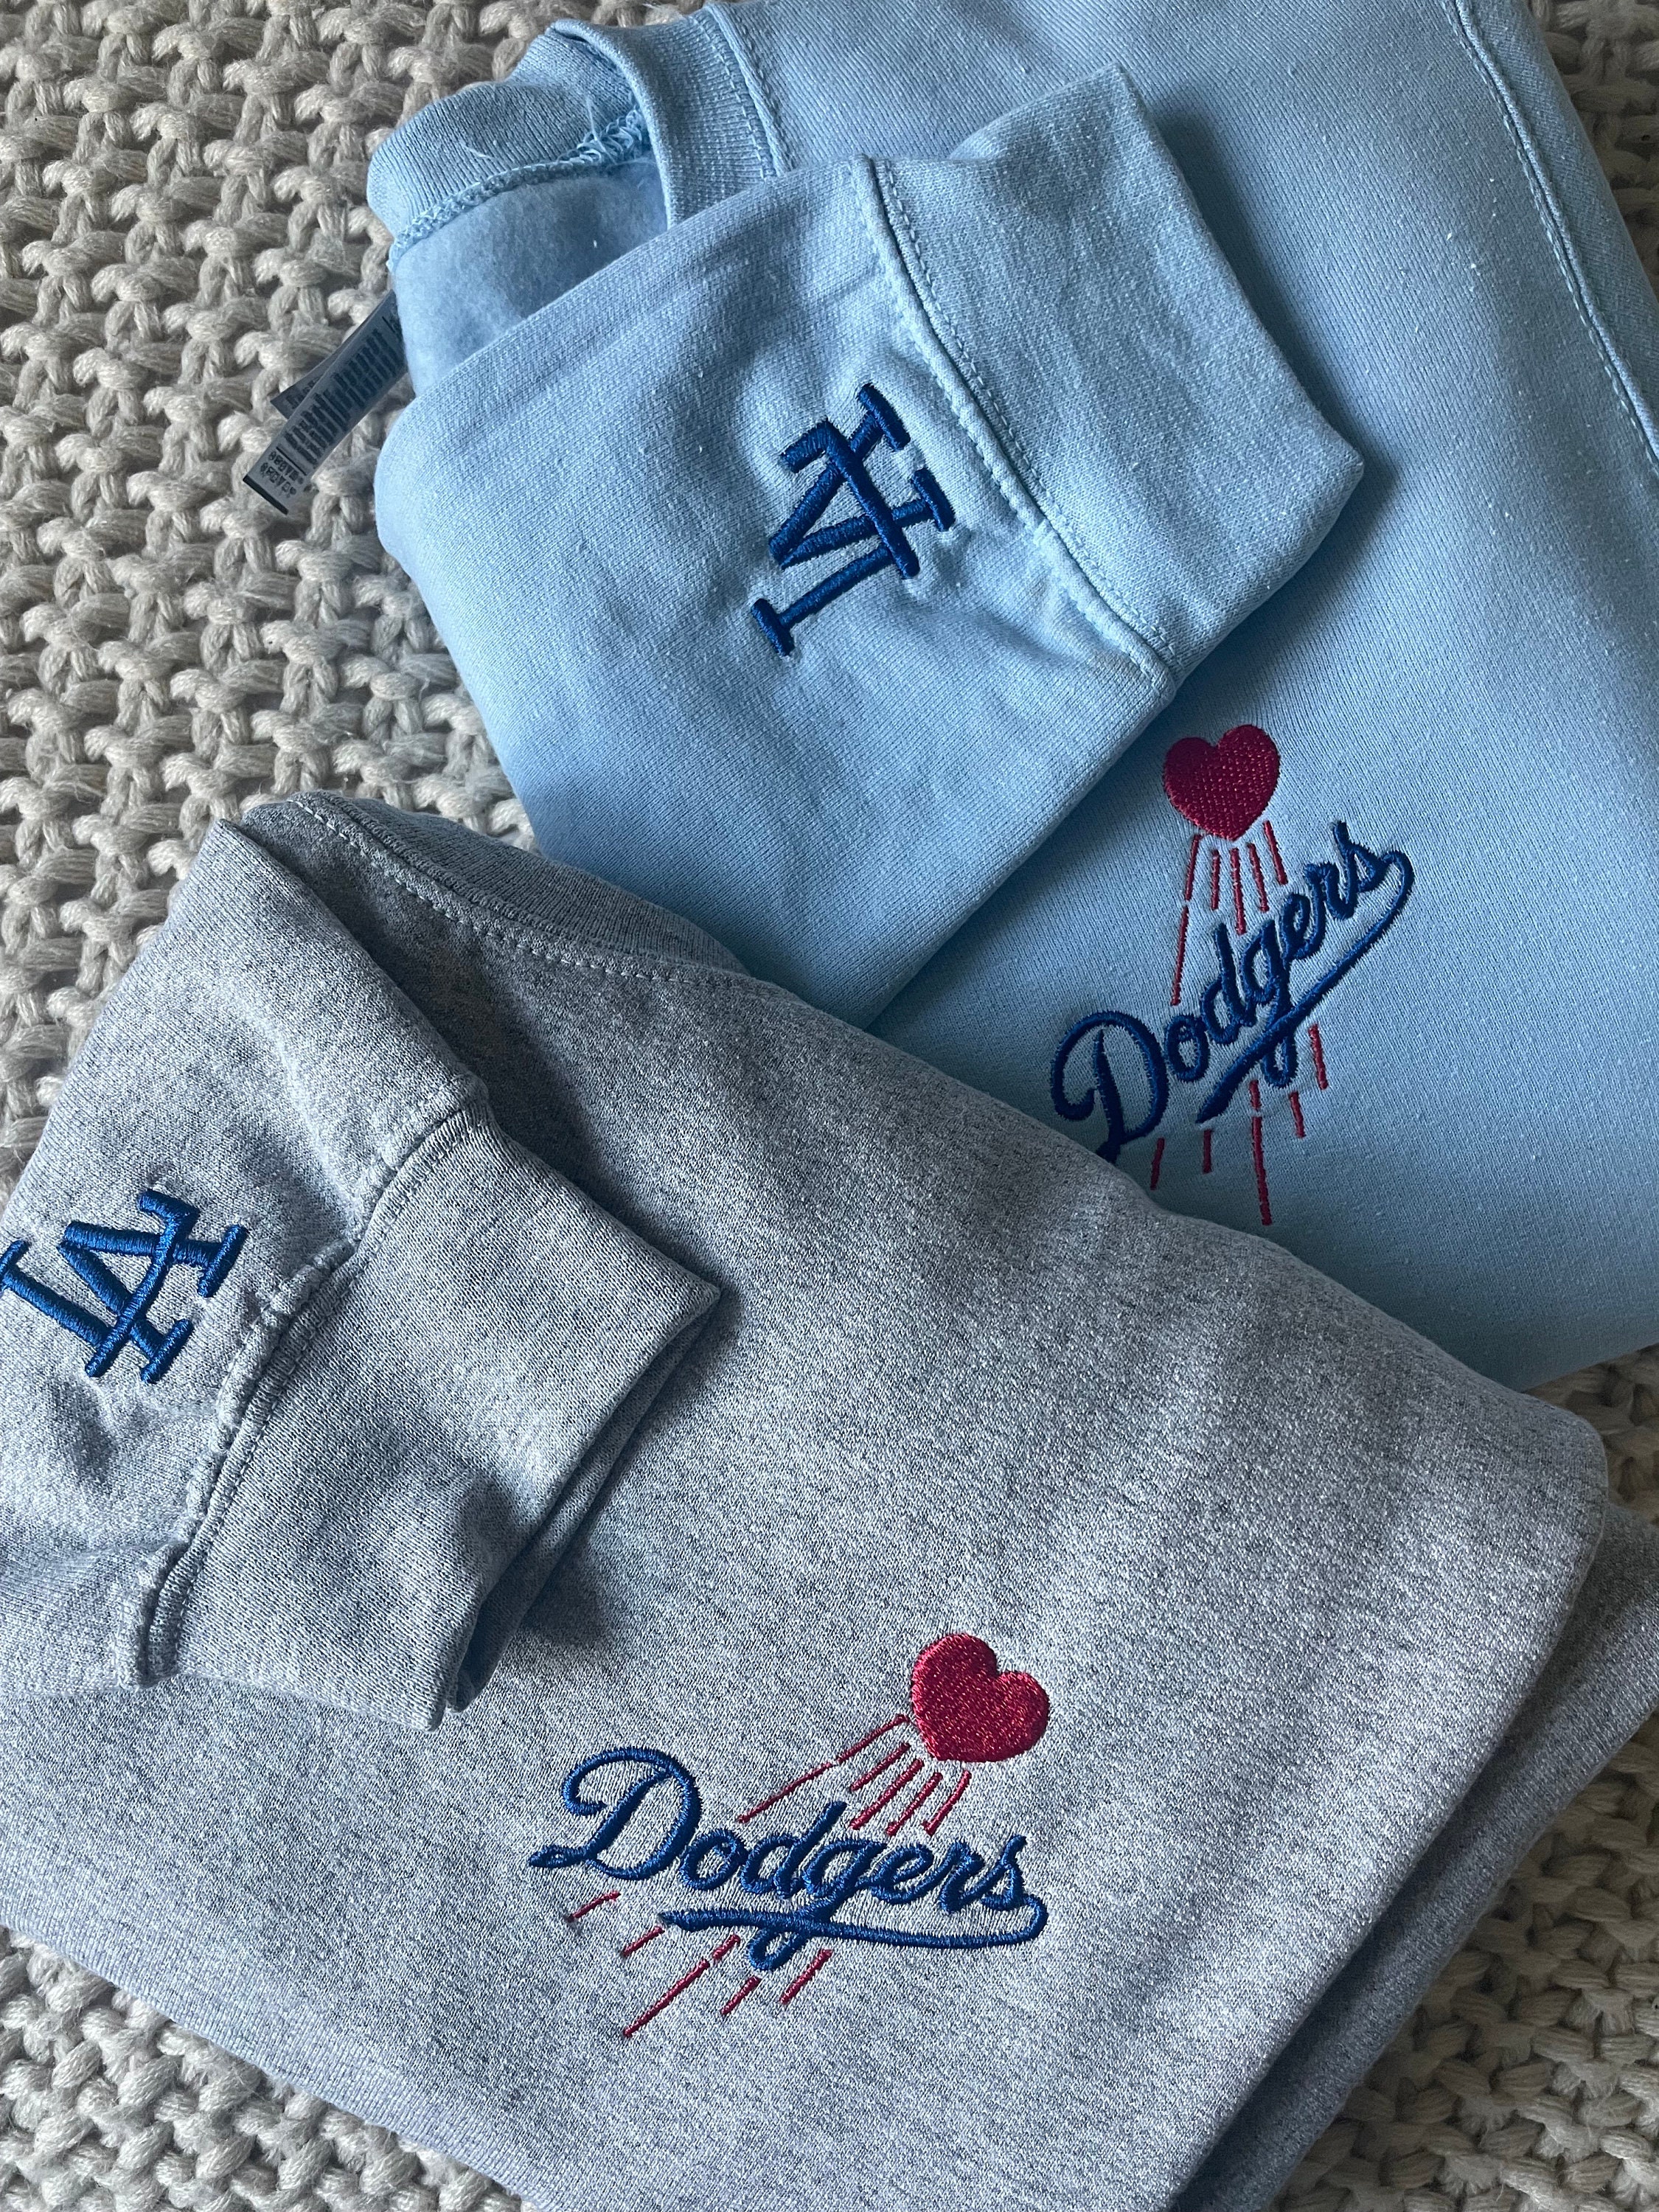 Dodgers Sweater Logo History EST 1883 Los Angeles Dodgers Gift -  Personalized Gifts: Family, Sports, Occasions, Trending